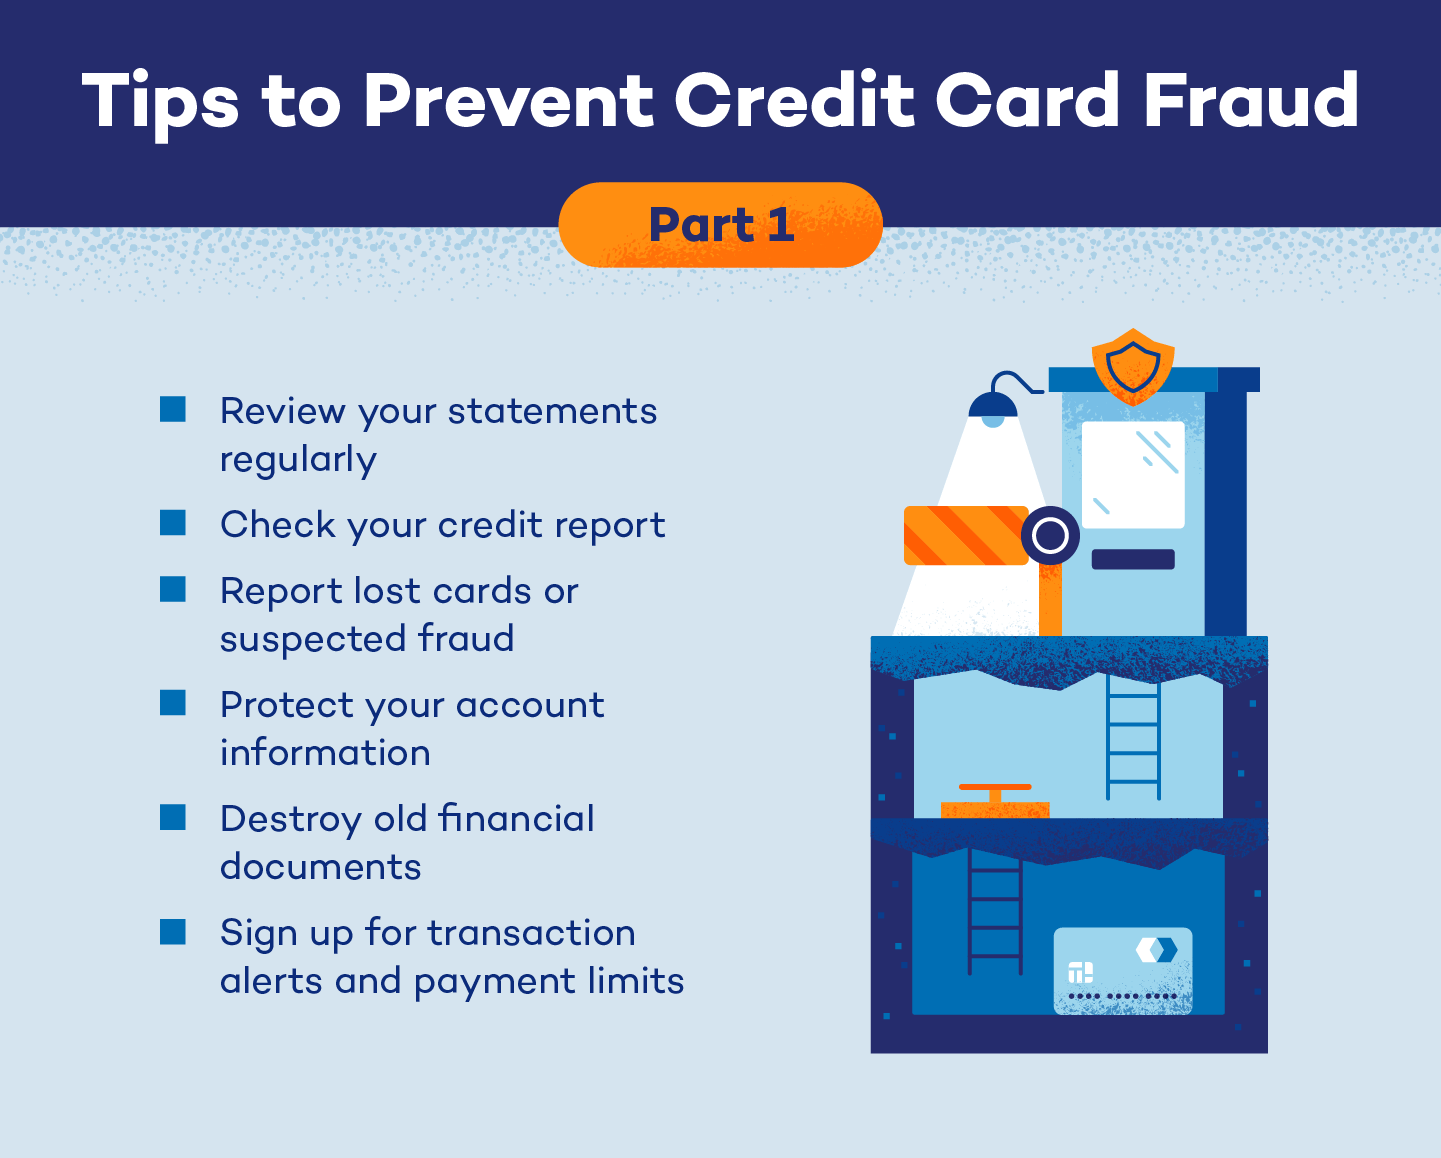 prevent credit card fraud by checking your credit reports, review your statements regularly, and more.